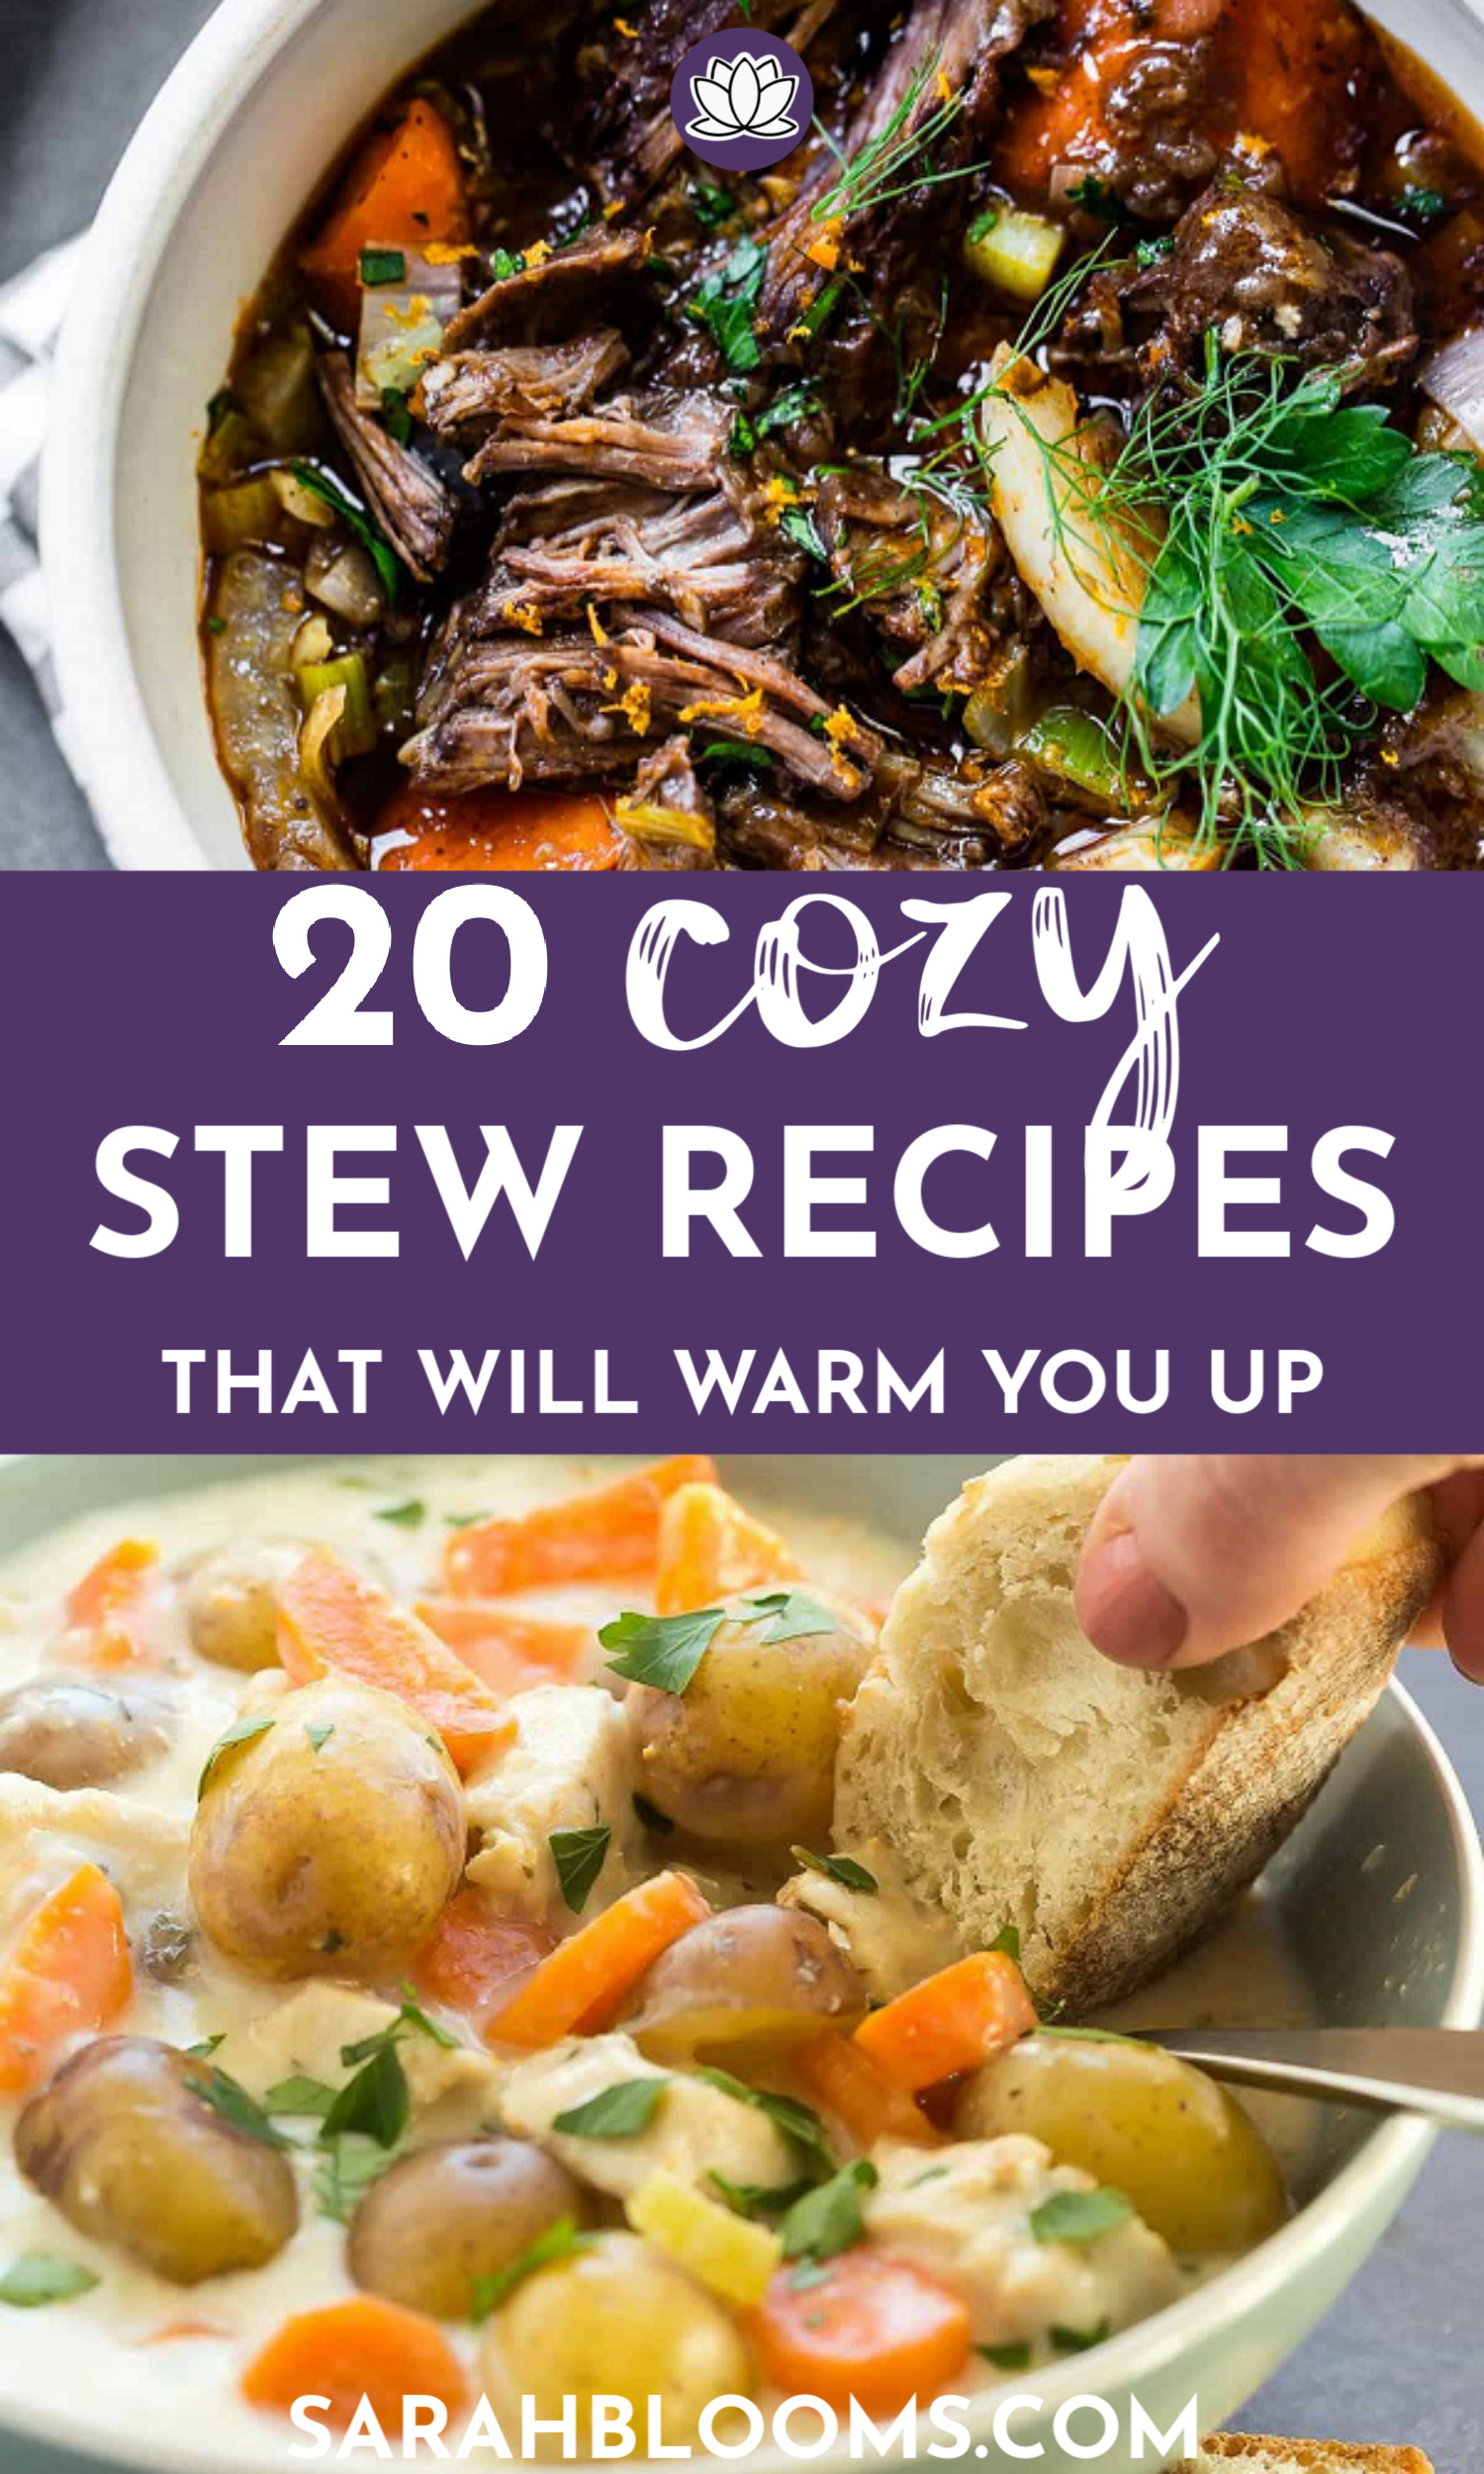 Warm up with these Cozy Stew Recipes your whole family will love! These Warm and Hearty Stews are perfect for easy weekend meals and busy weeknights alike! #stewrecipes #souprecipes #cozystews #cozystewrecipes #easymeals #easydinnerideas #weeknightmeals #familyrecipes